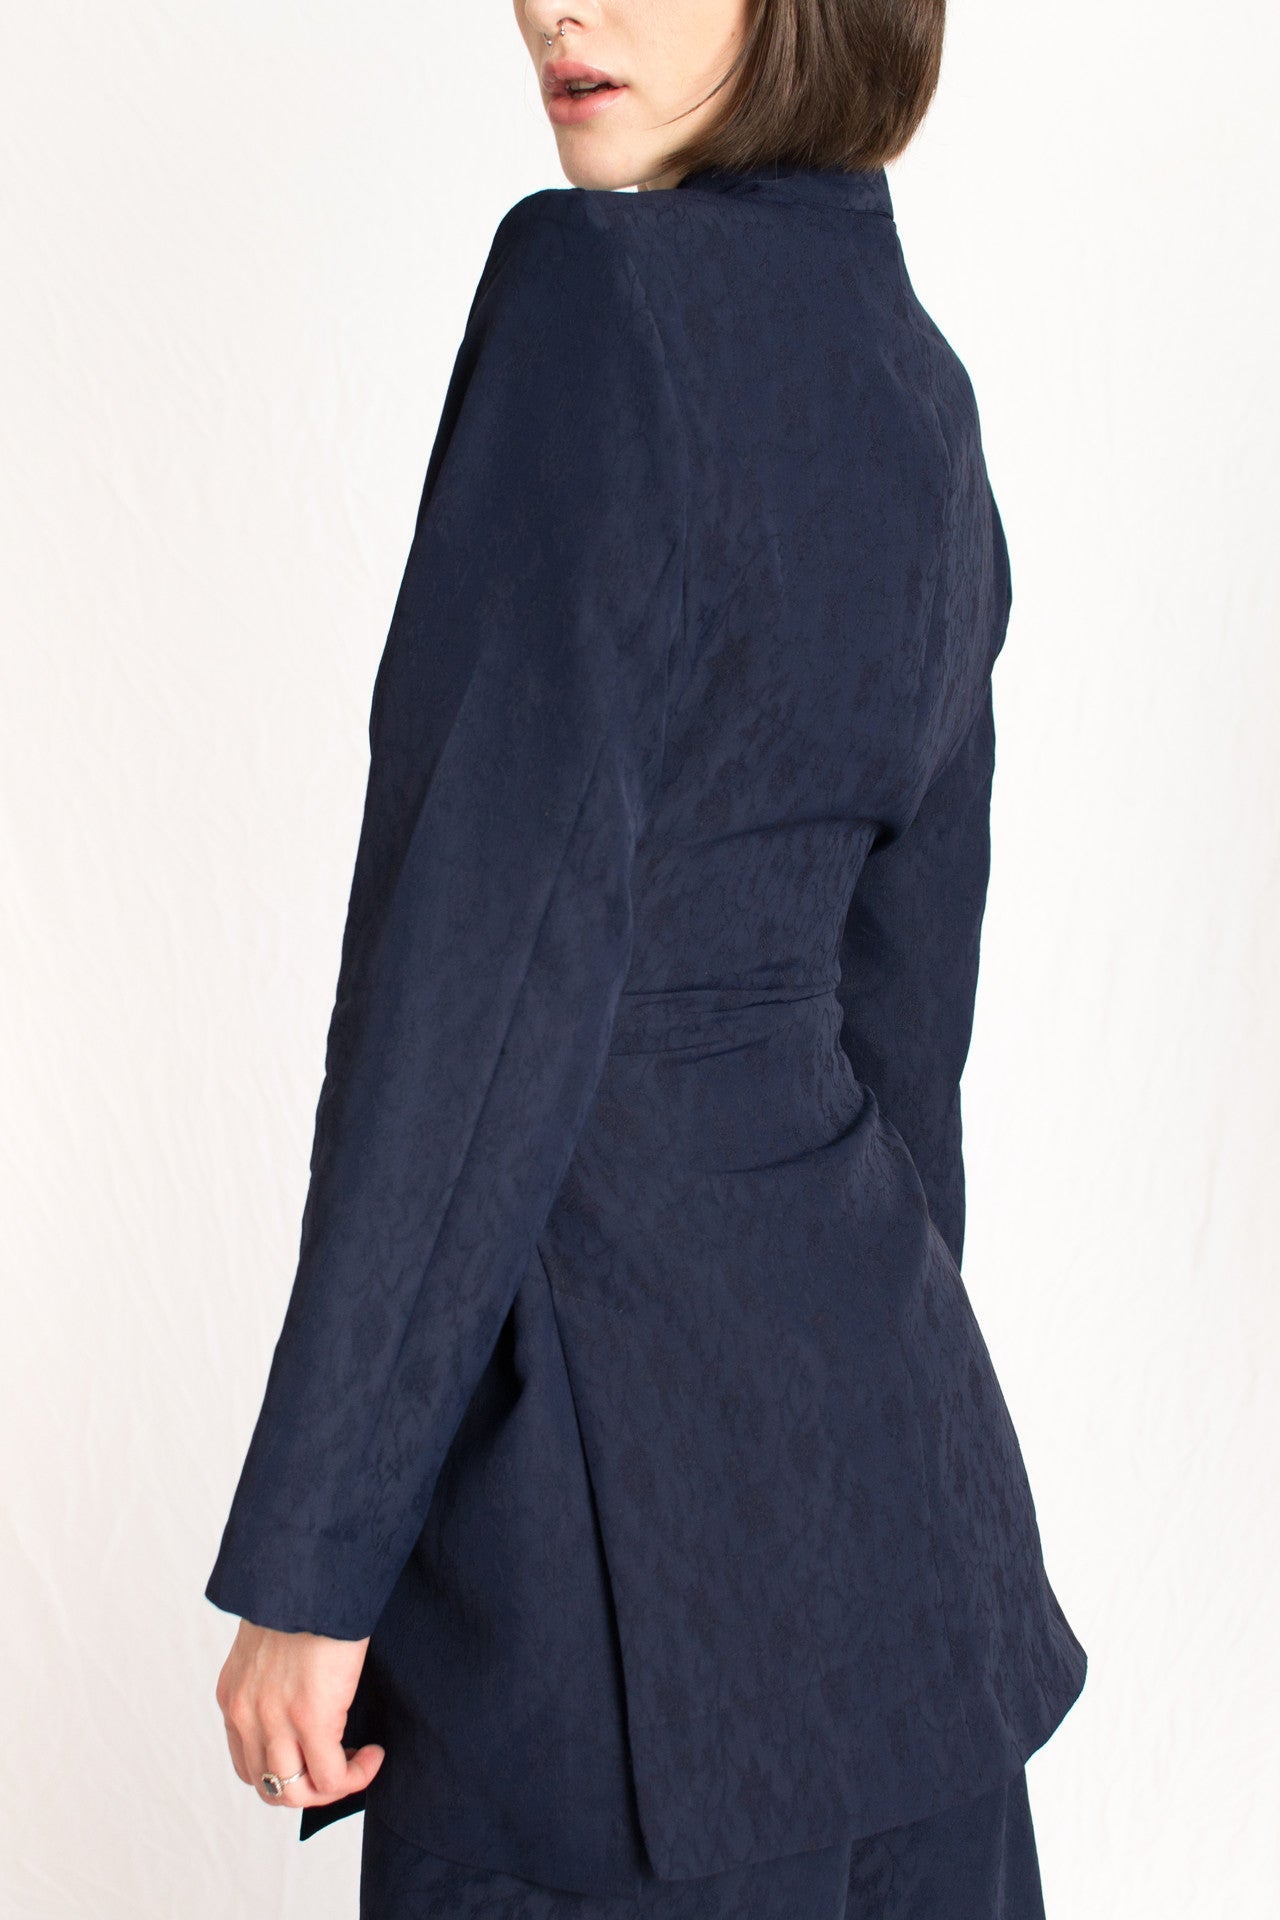 navy blue patterned relaxed fit blazer with wrap around belt